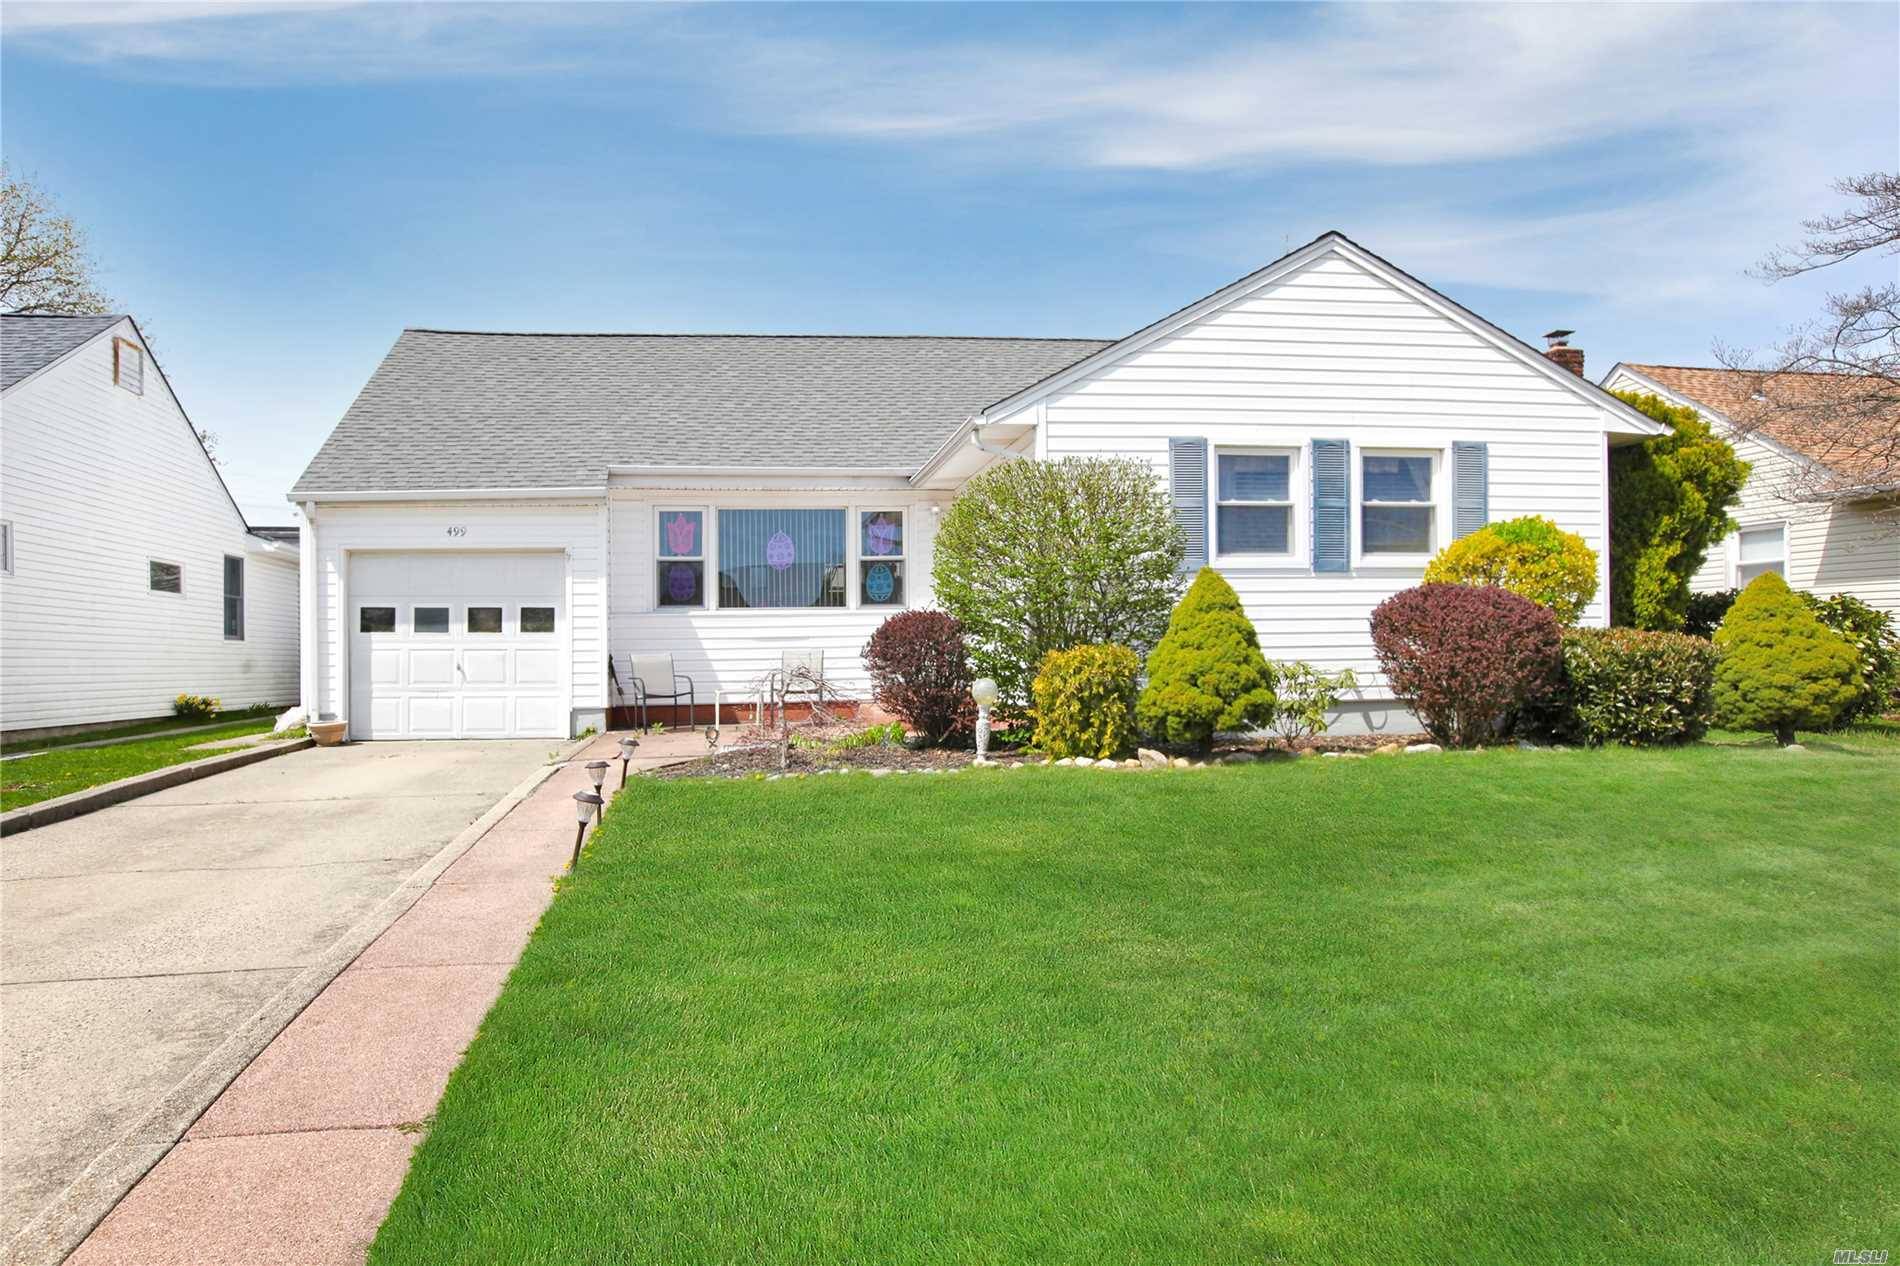 Great Ranch in Bethpage in lovely neighborhood with sidewalks and lamp posts.